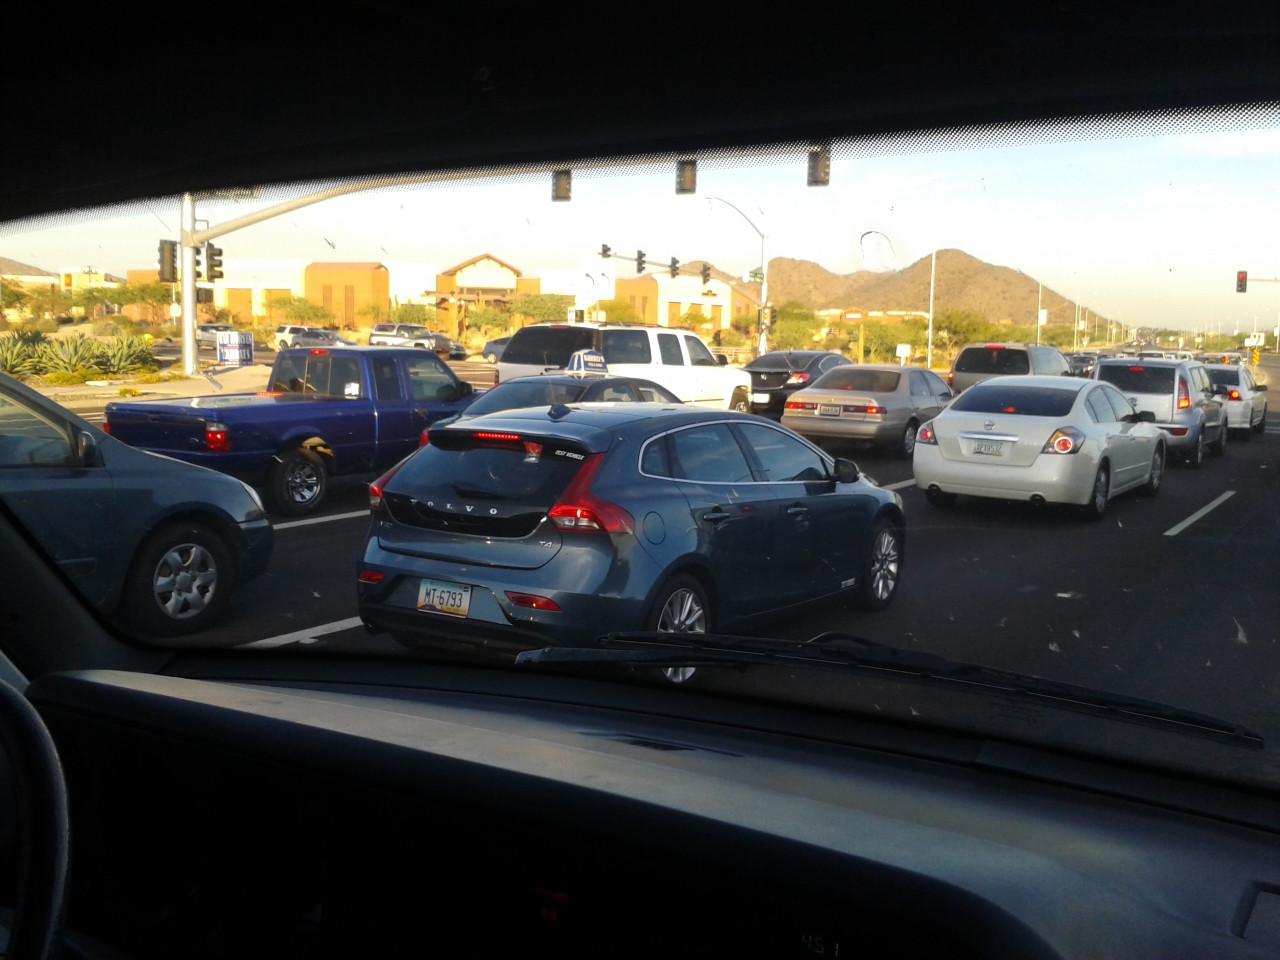 Saw this 2013 Volvo V40 T4 yesterday here in Arizona.